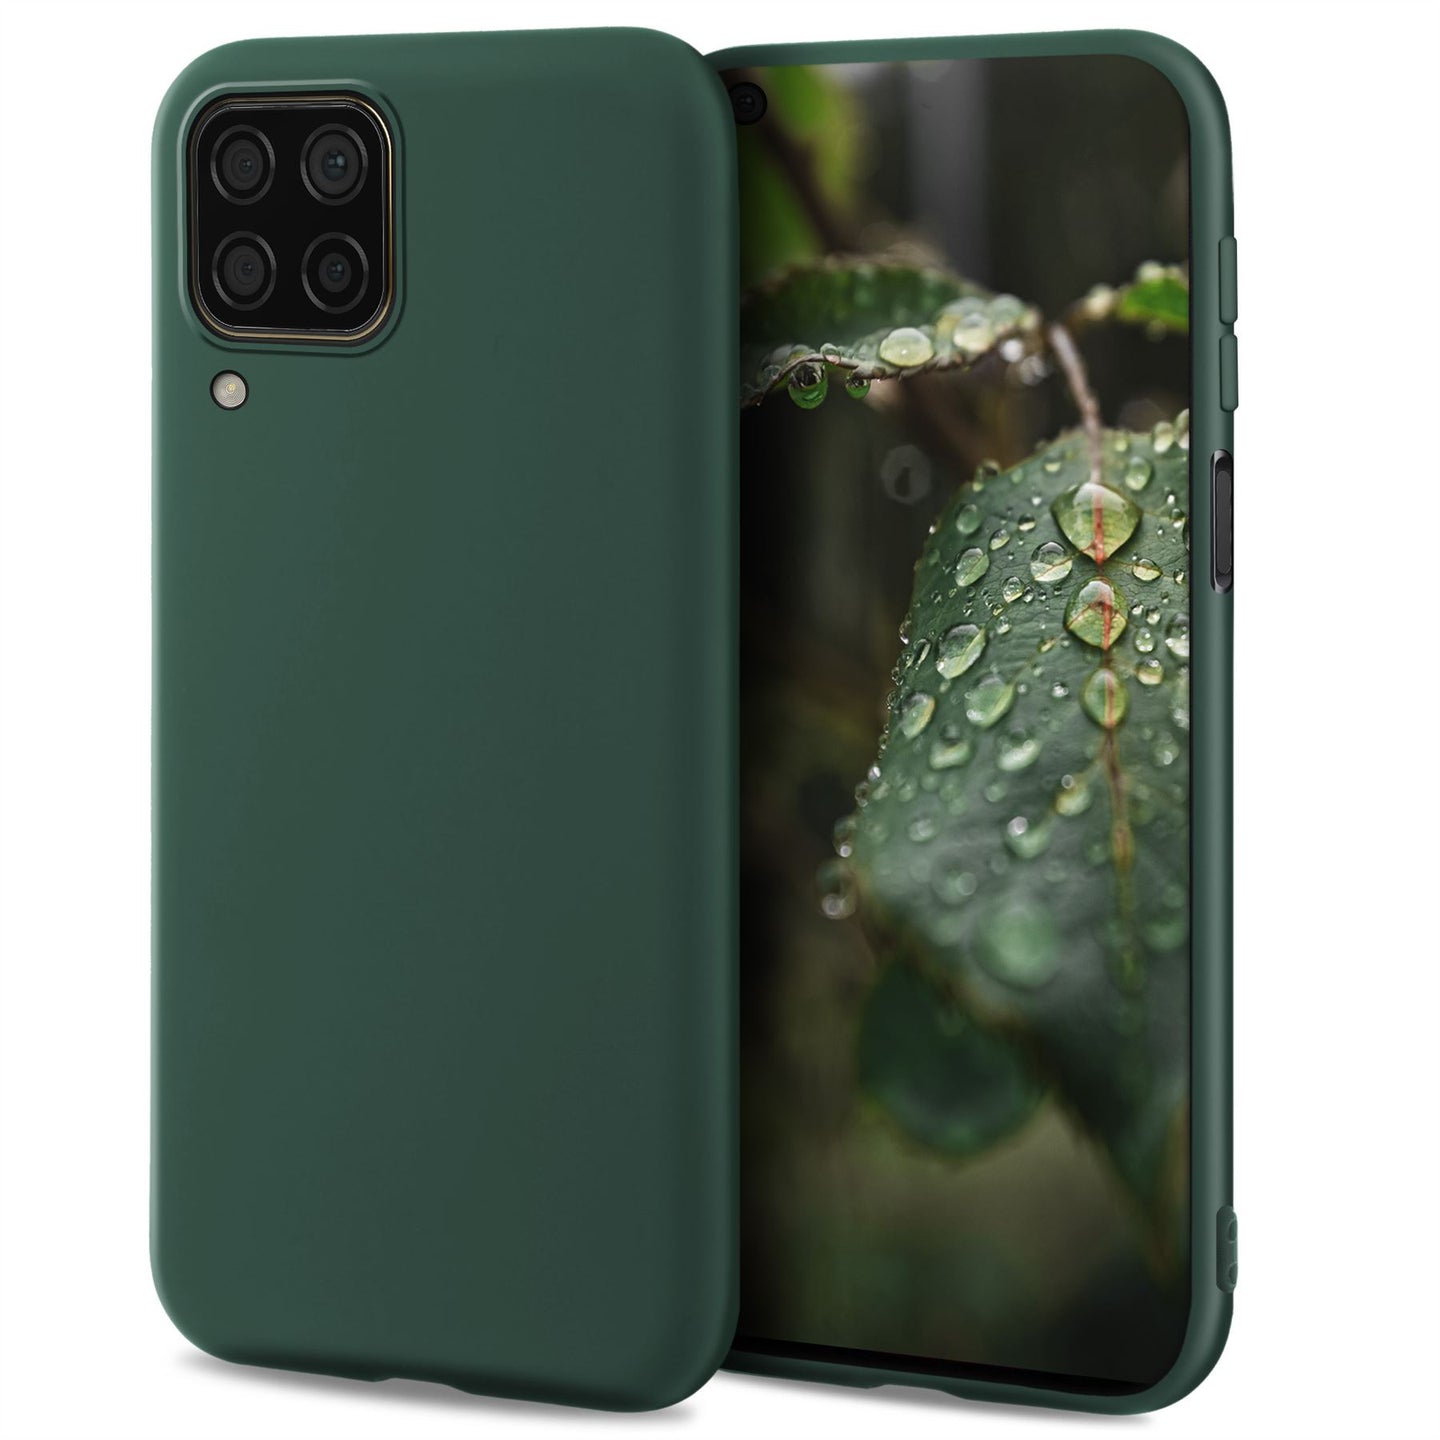 Moozy Lifestyle. Designed for Huawei P40 Lite Case, Dark Green - Liquid Silicone Cover with Matte Finish and Soft Microfiber Lining